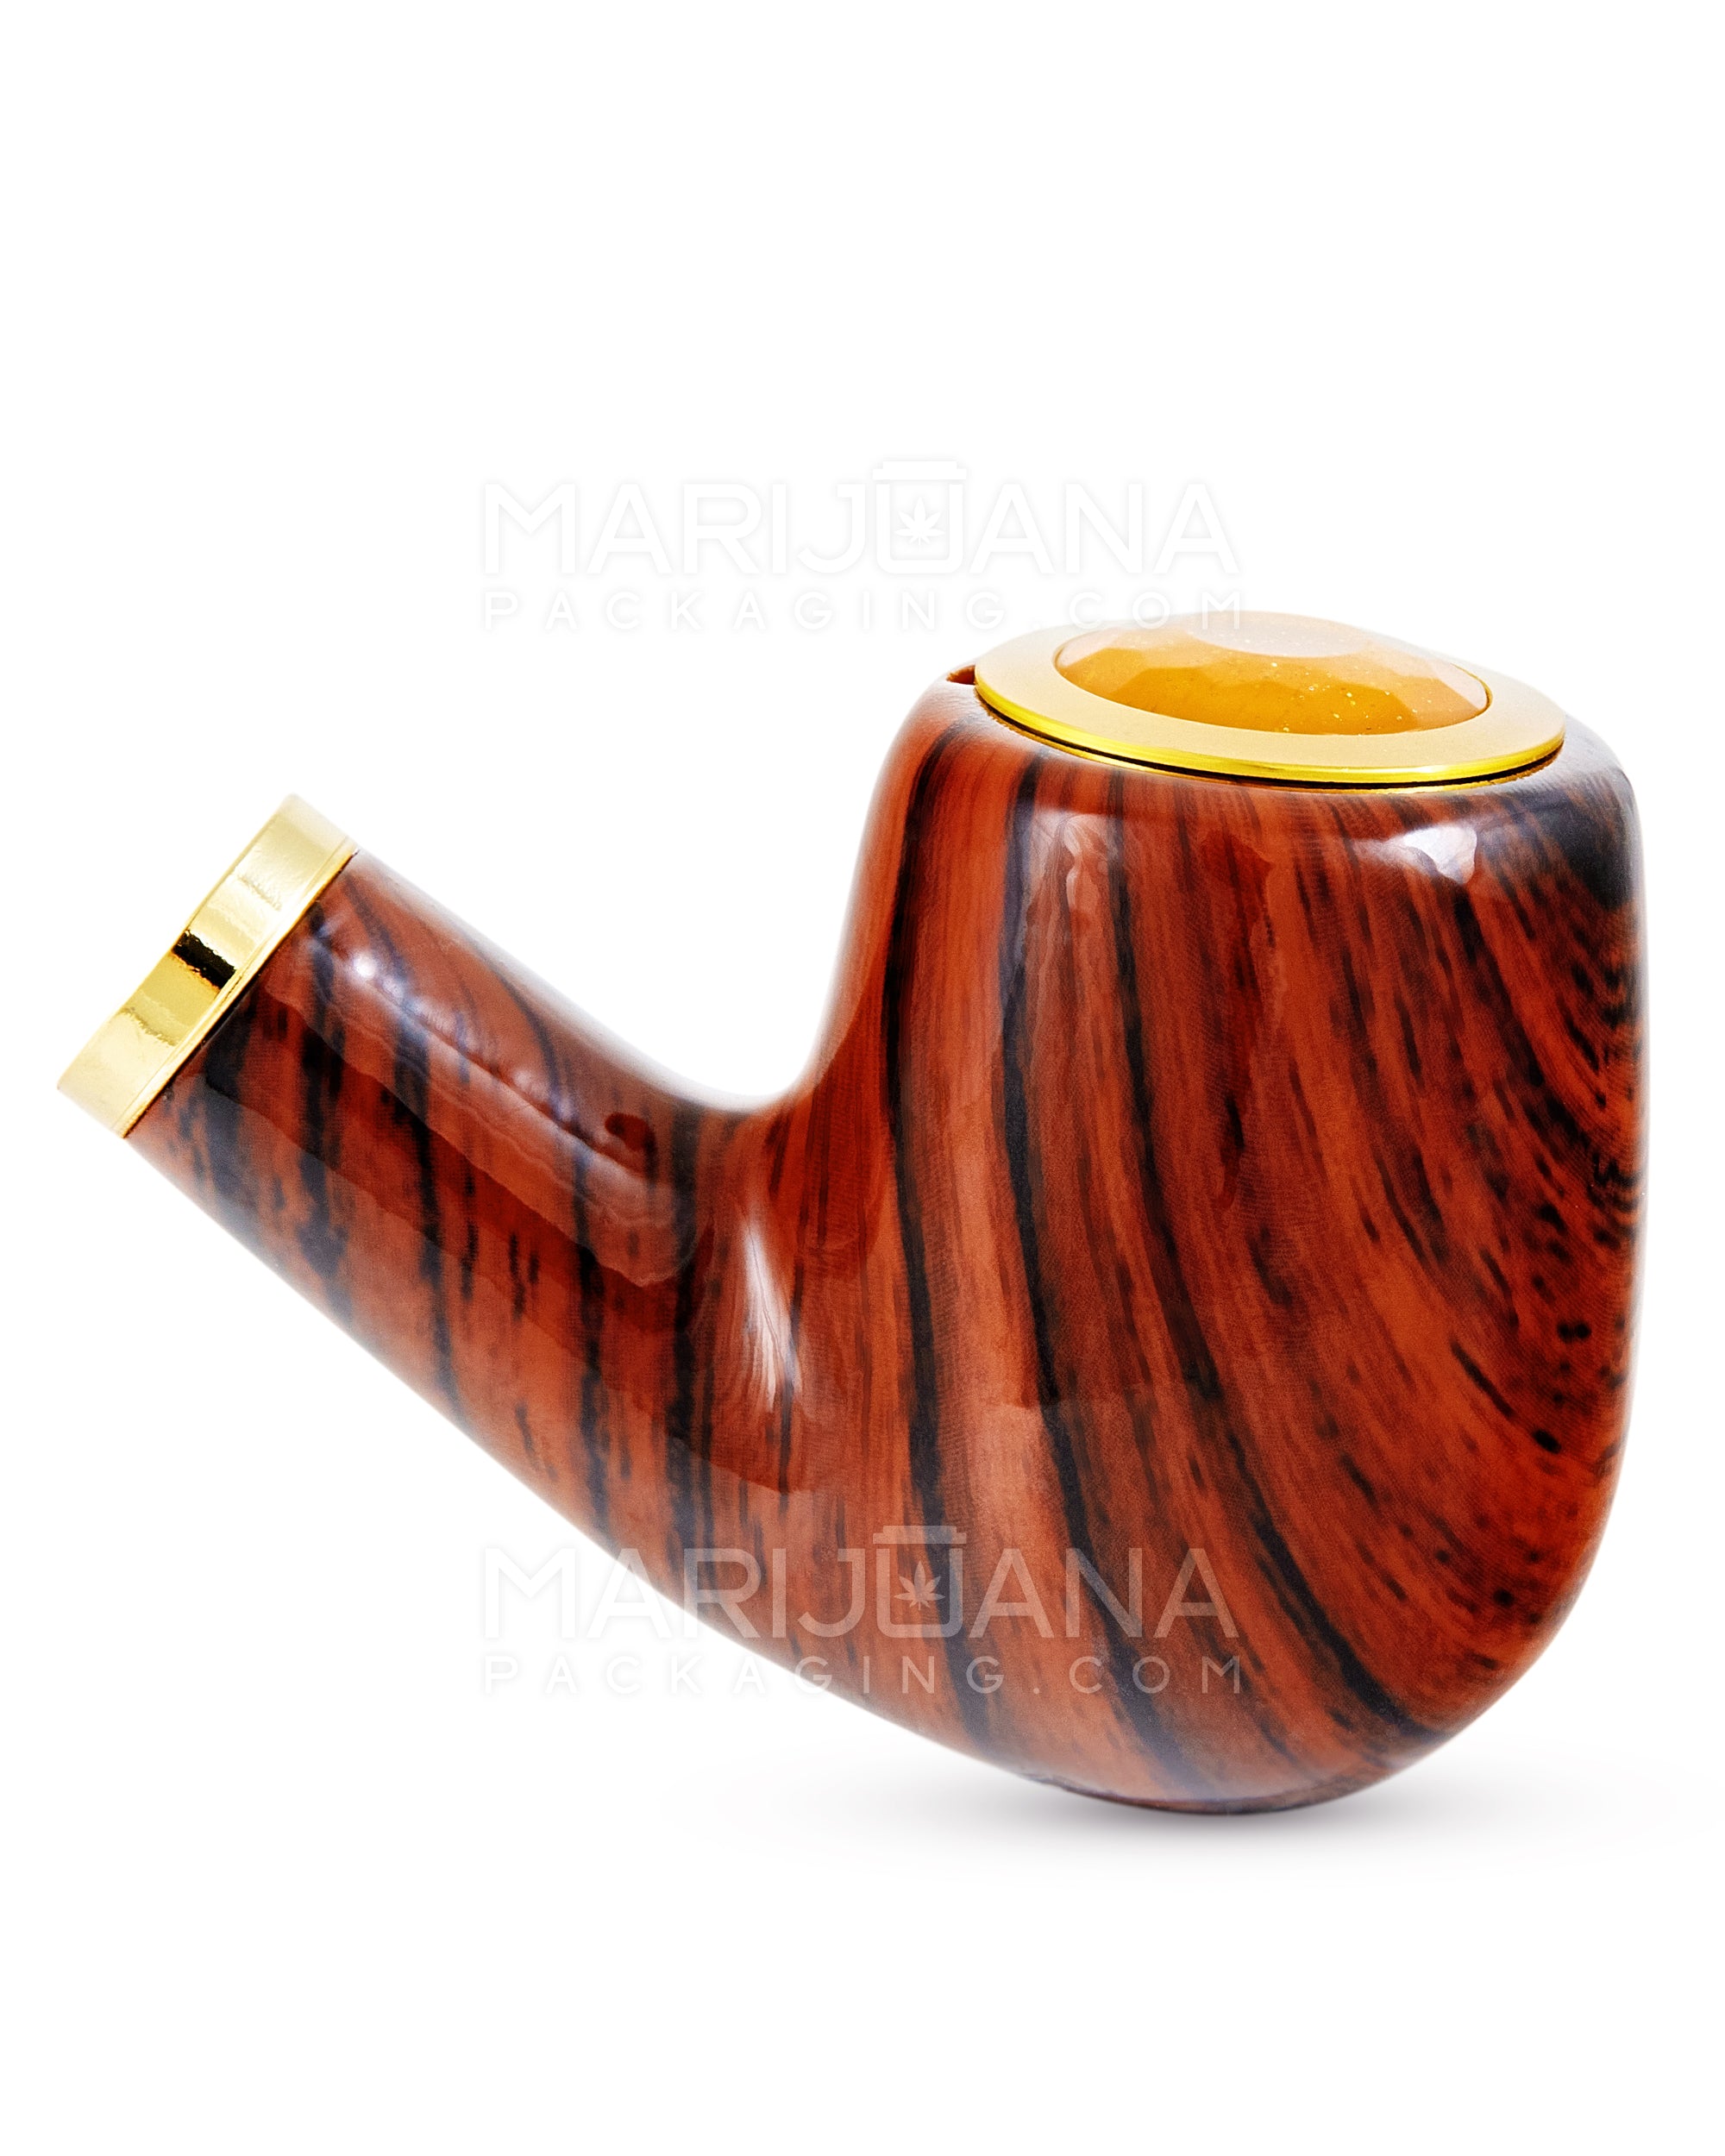 Curved & Matching Lid Premium Wood Hand Crafted Smoking Pipe